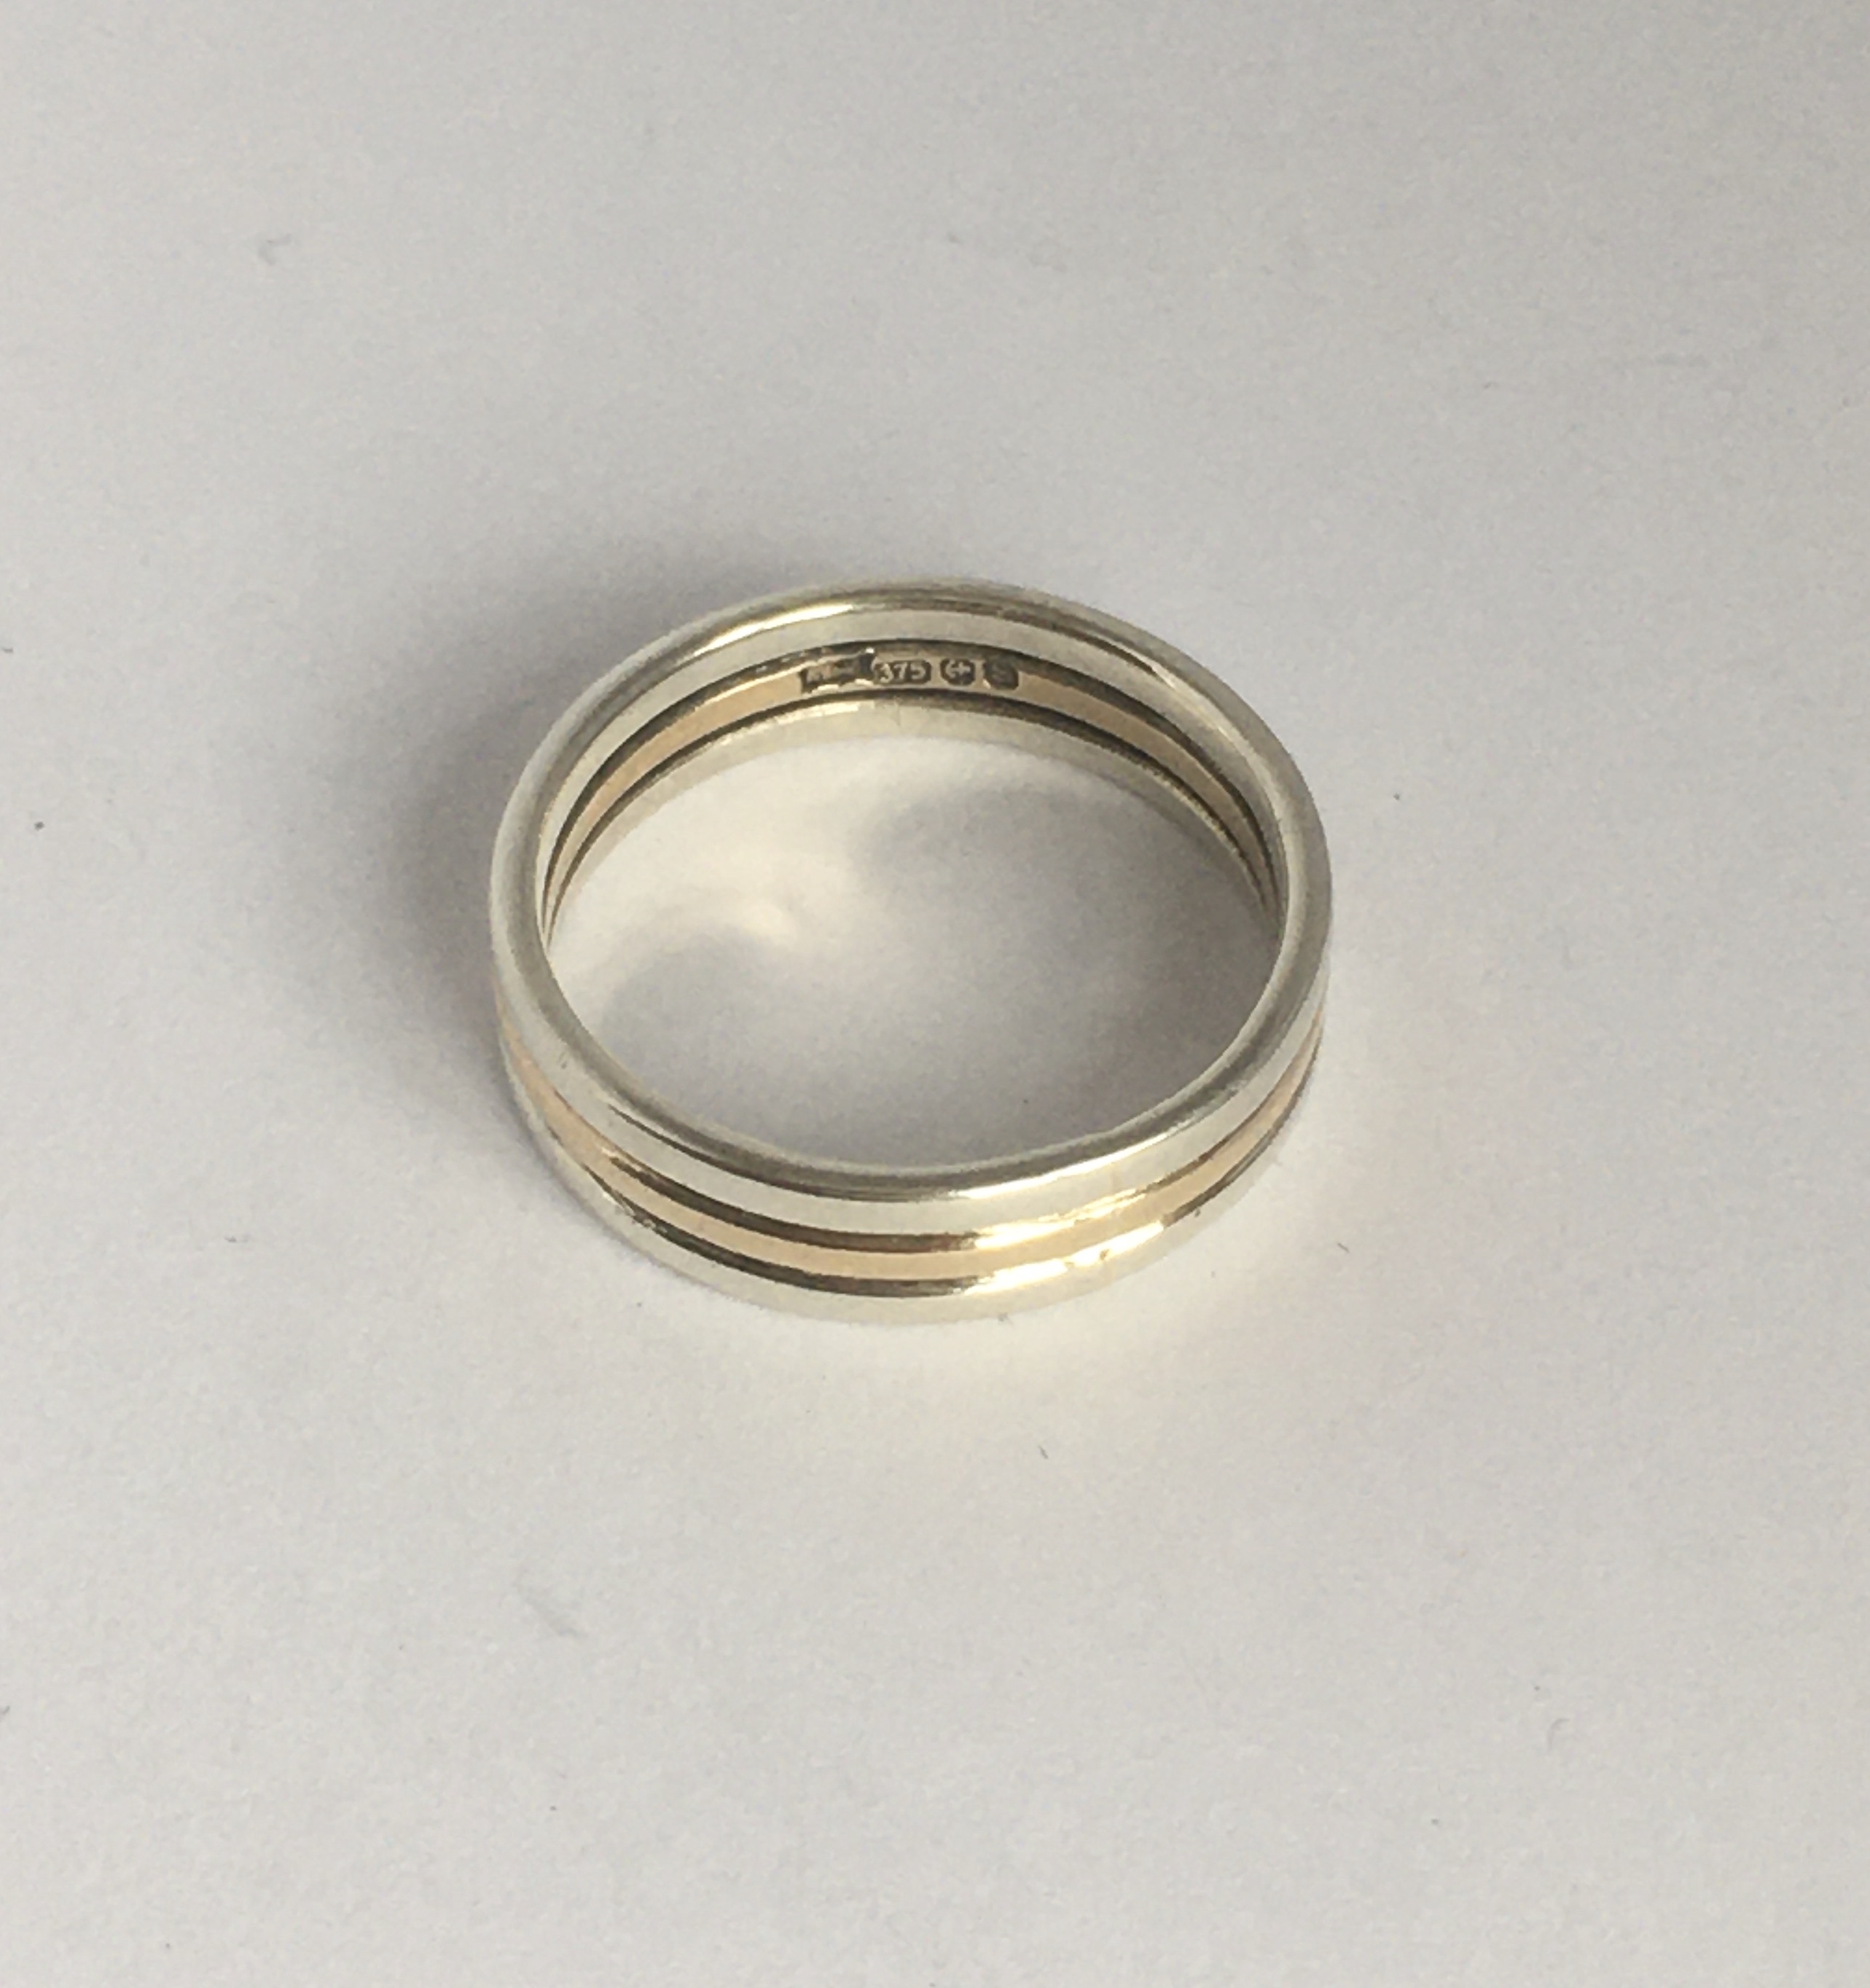 Banded gold ring